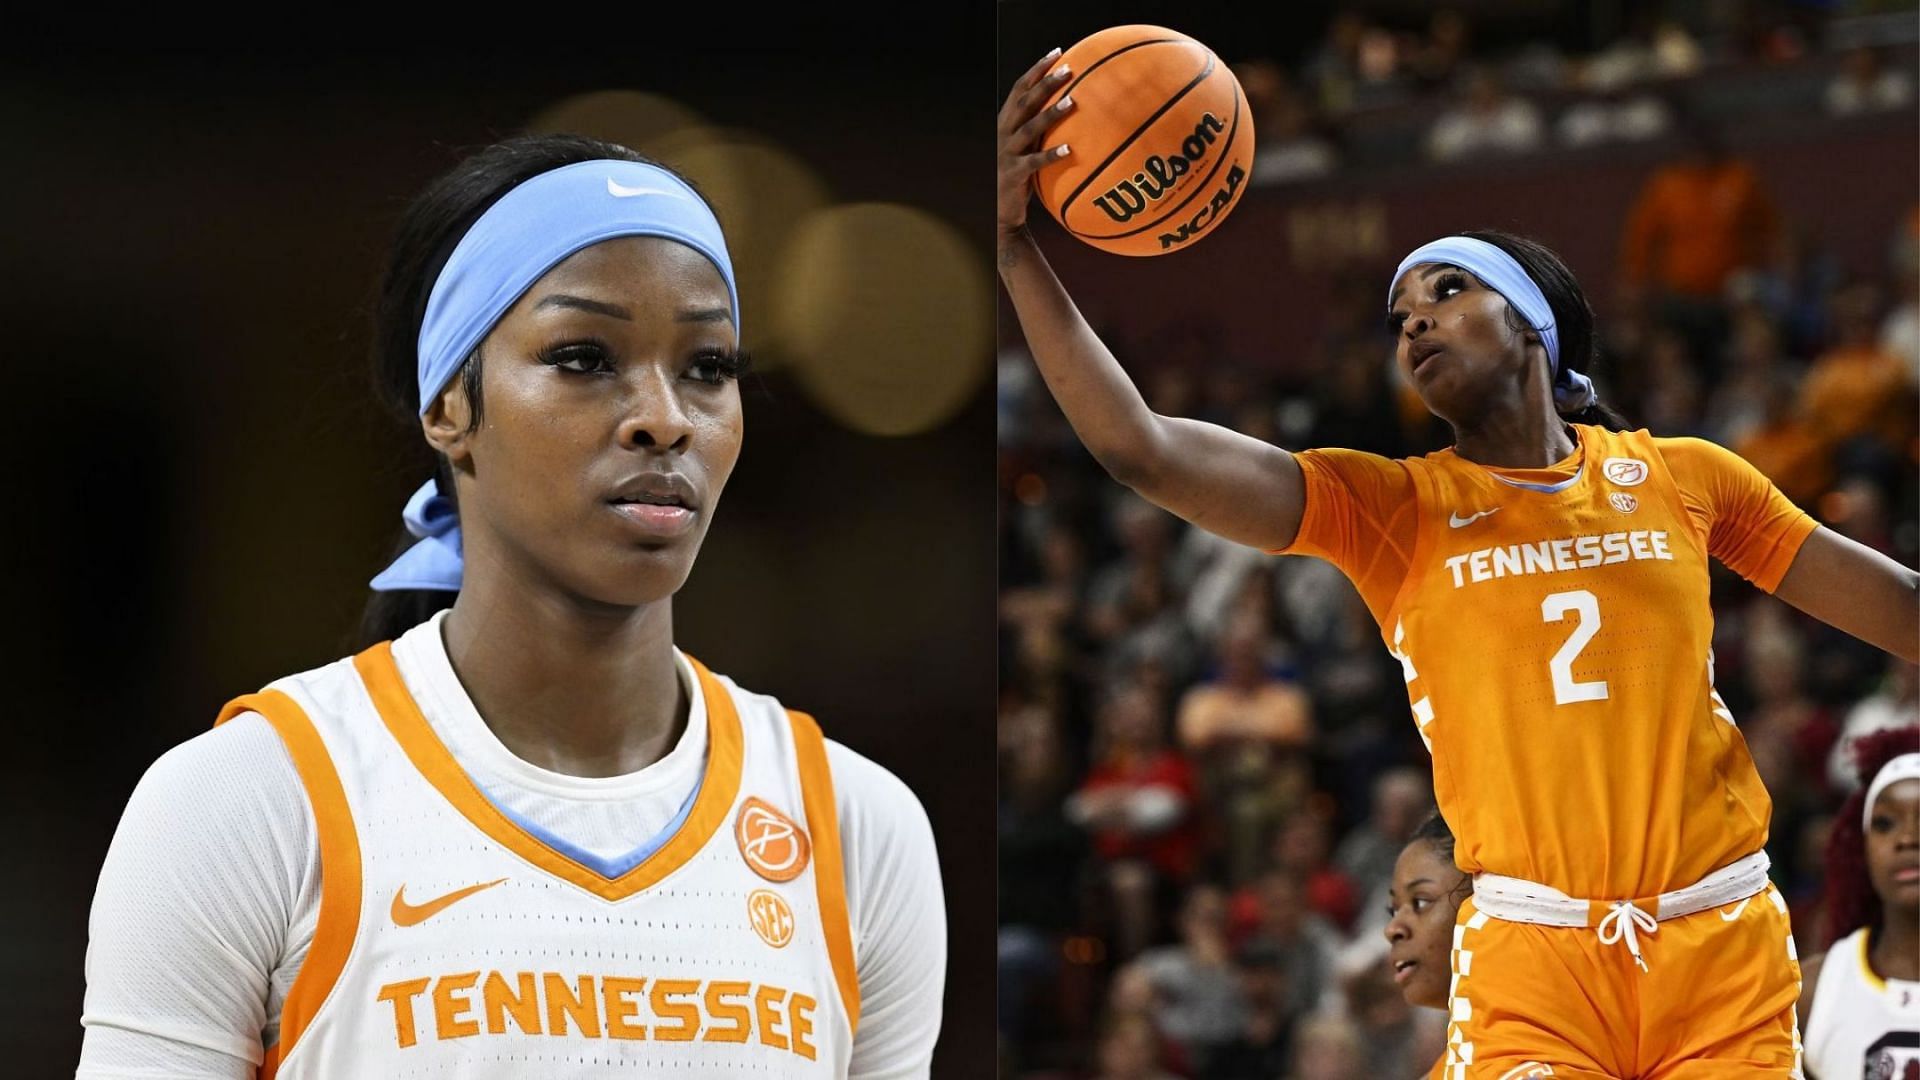 Tennessee Lady Volunteers forward Rickea Jackson is among the invitees in this year